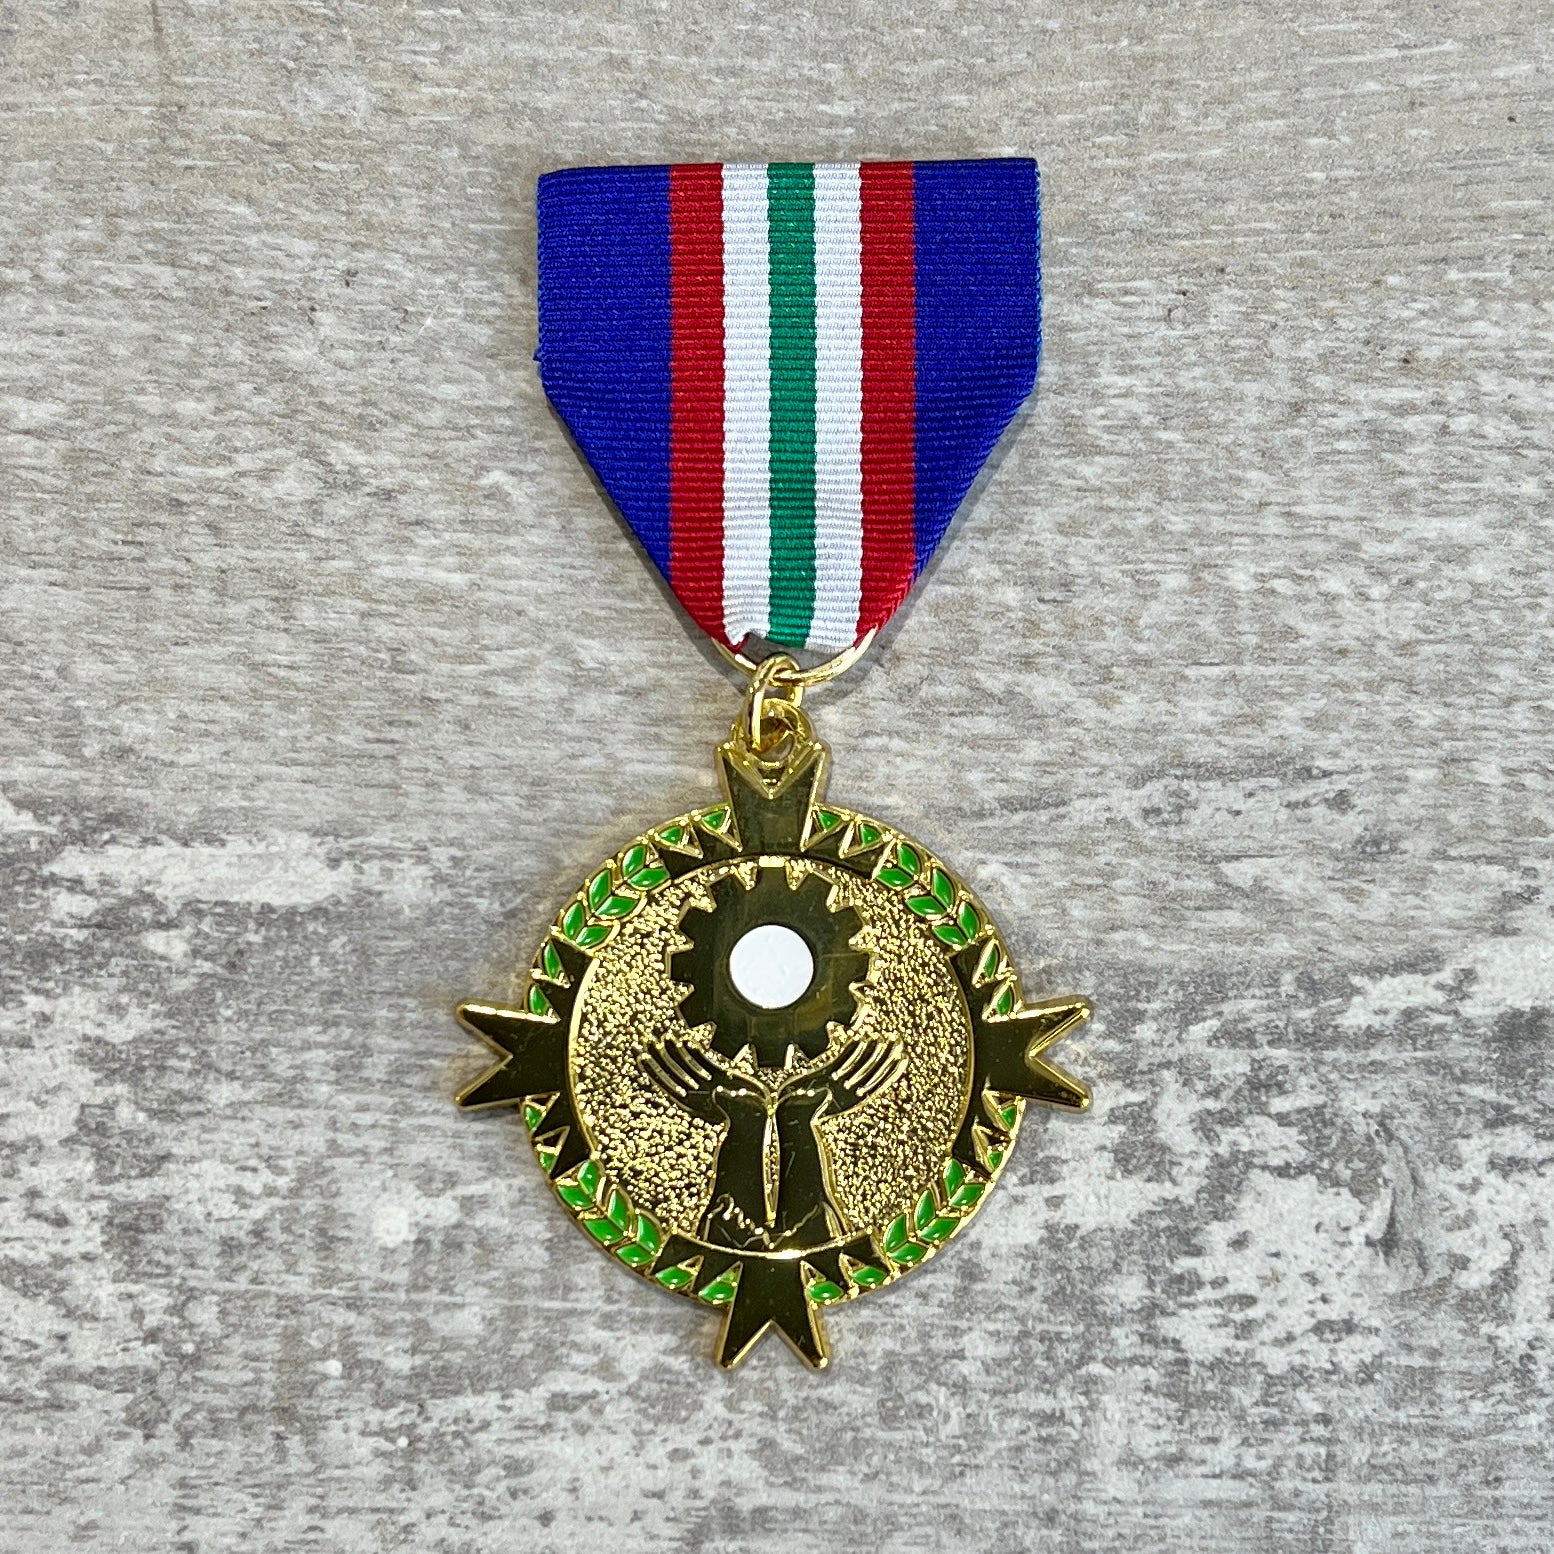 Philippines Military Civic Action Medal - Foxhole Medals